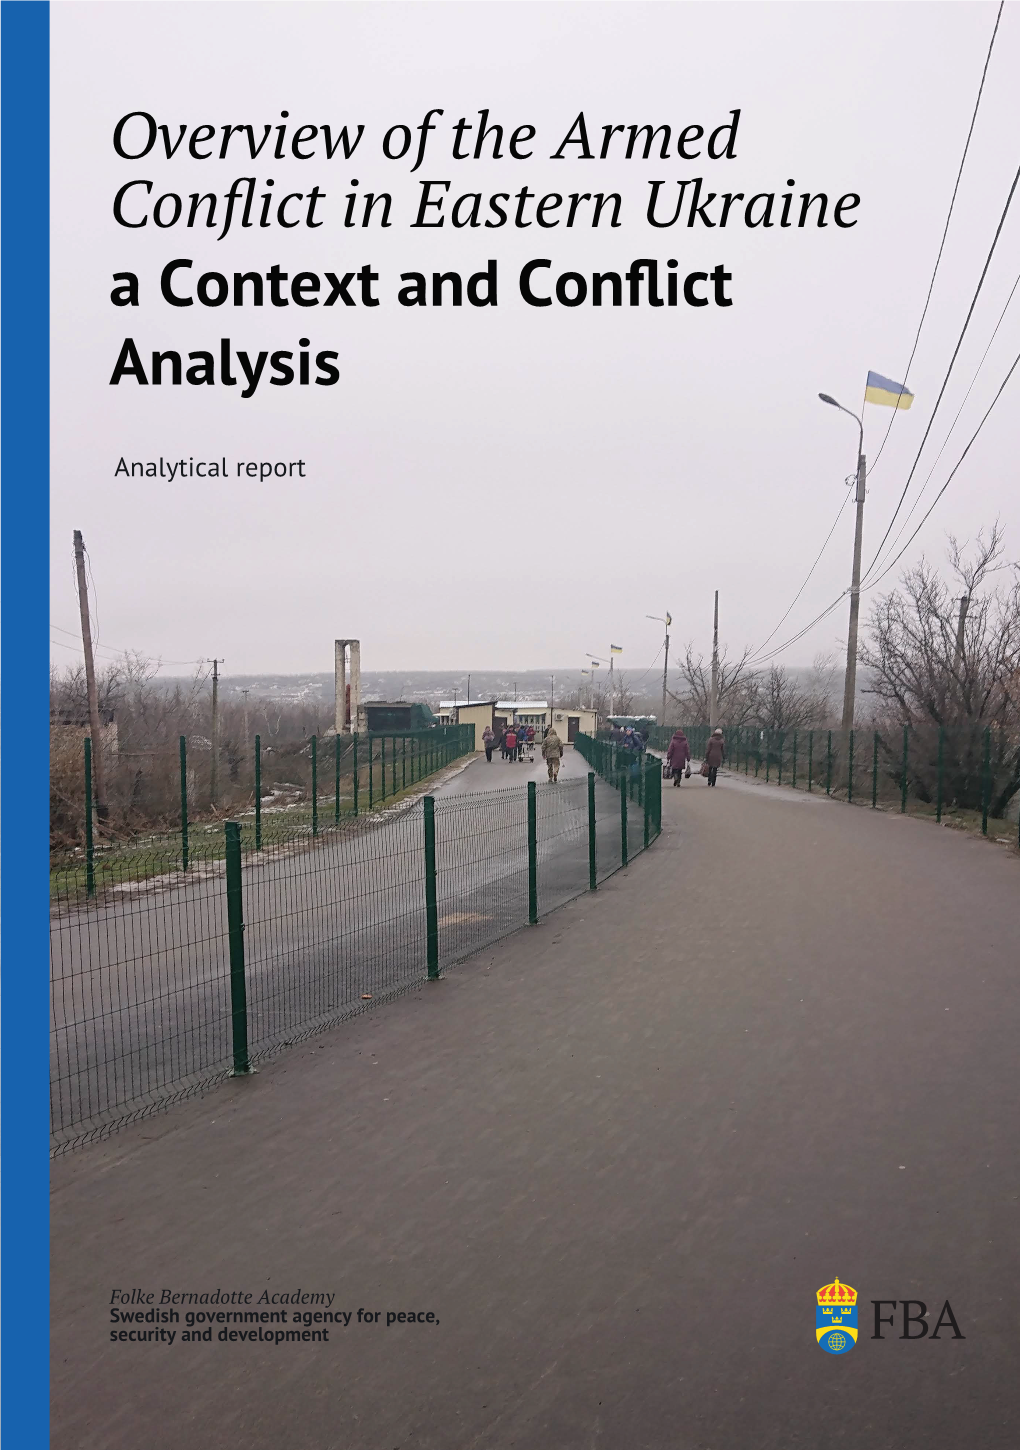 Overview of the Armed Conflict in Eastern Ukraine a Context and Conflict Analysis